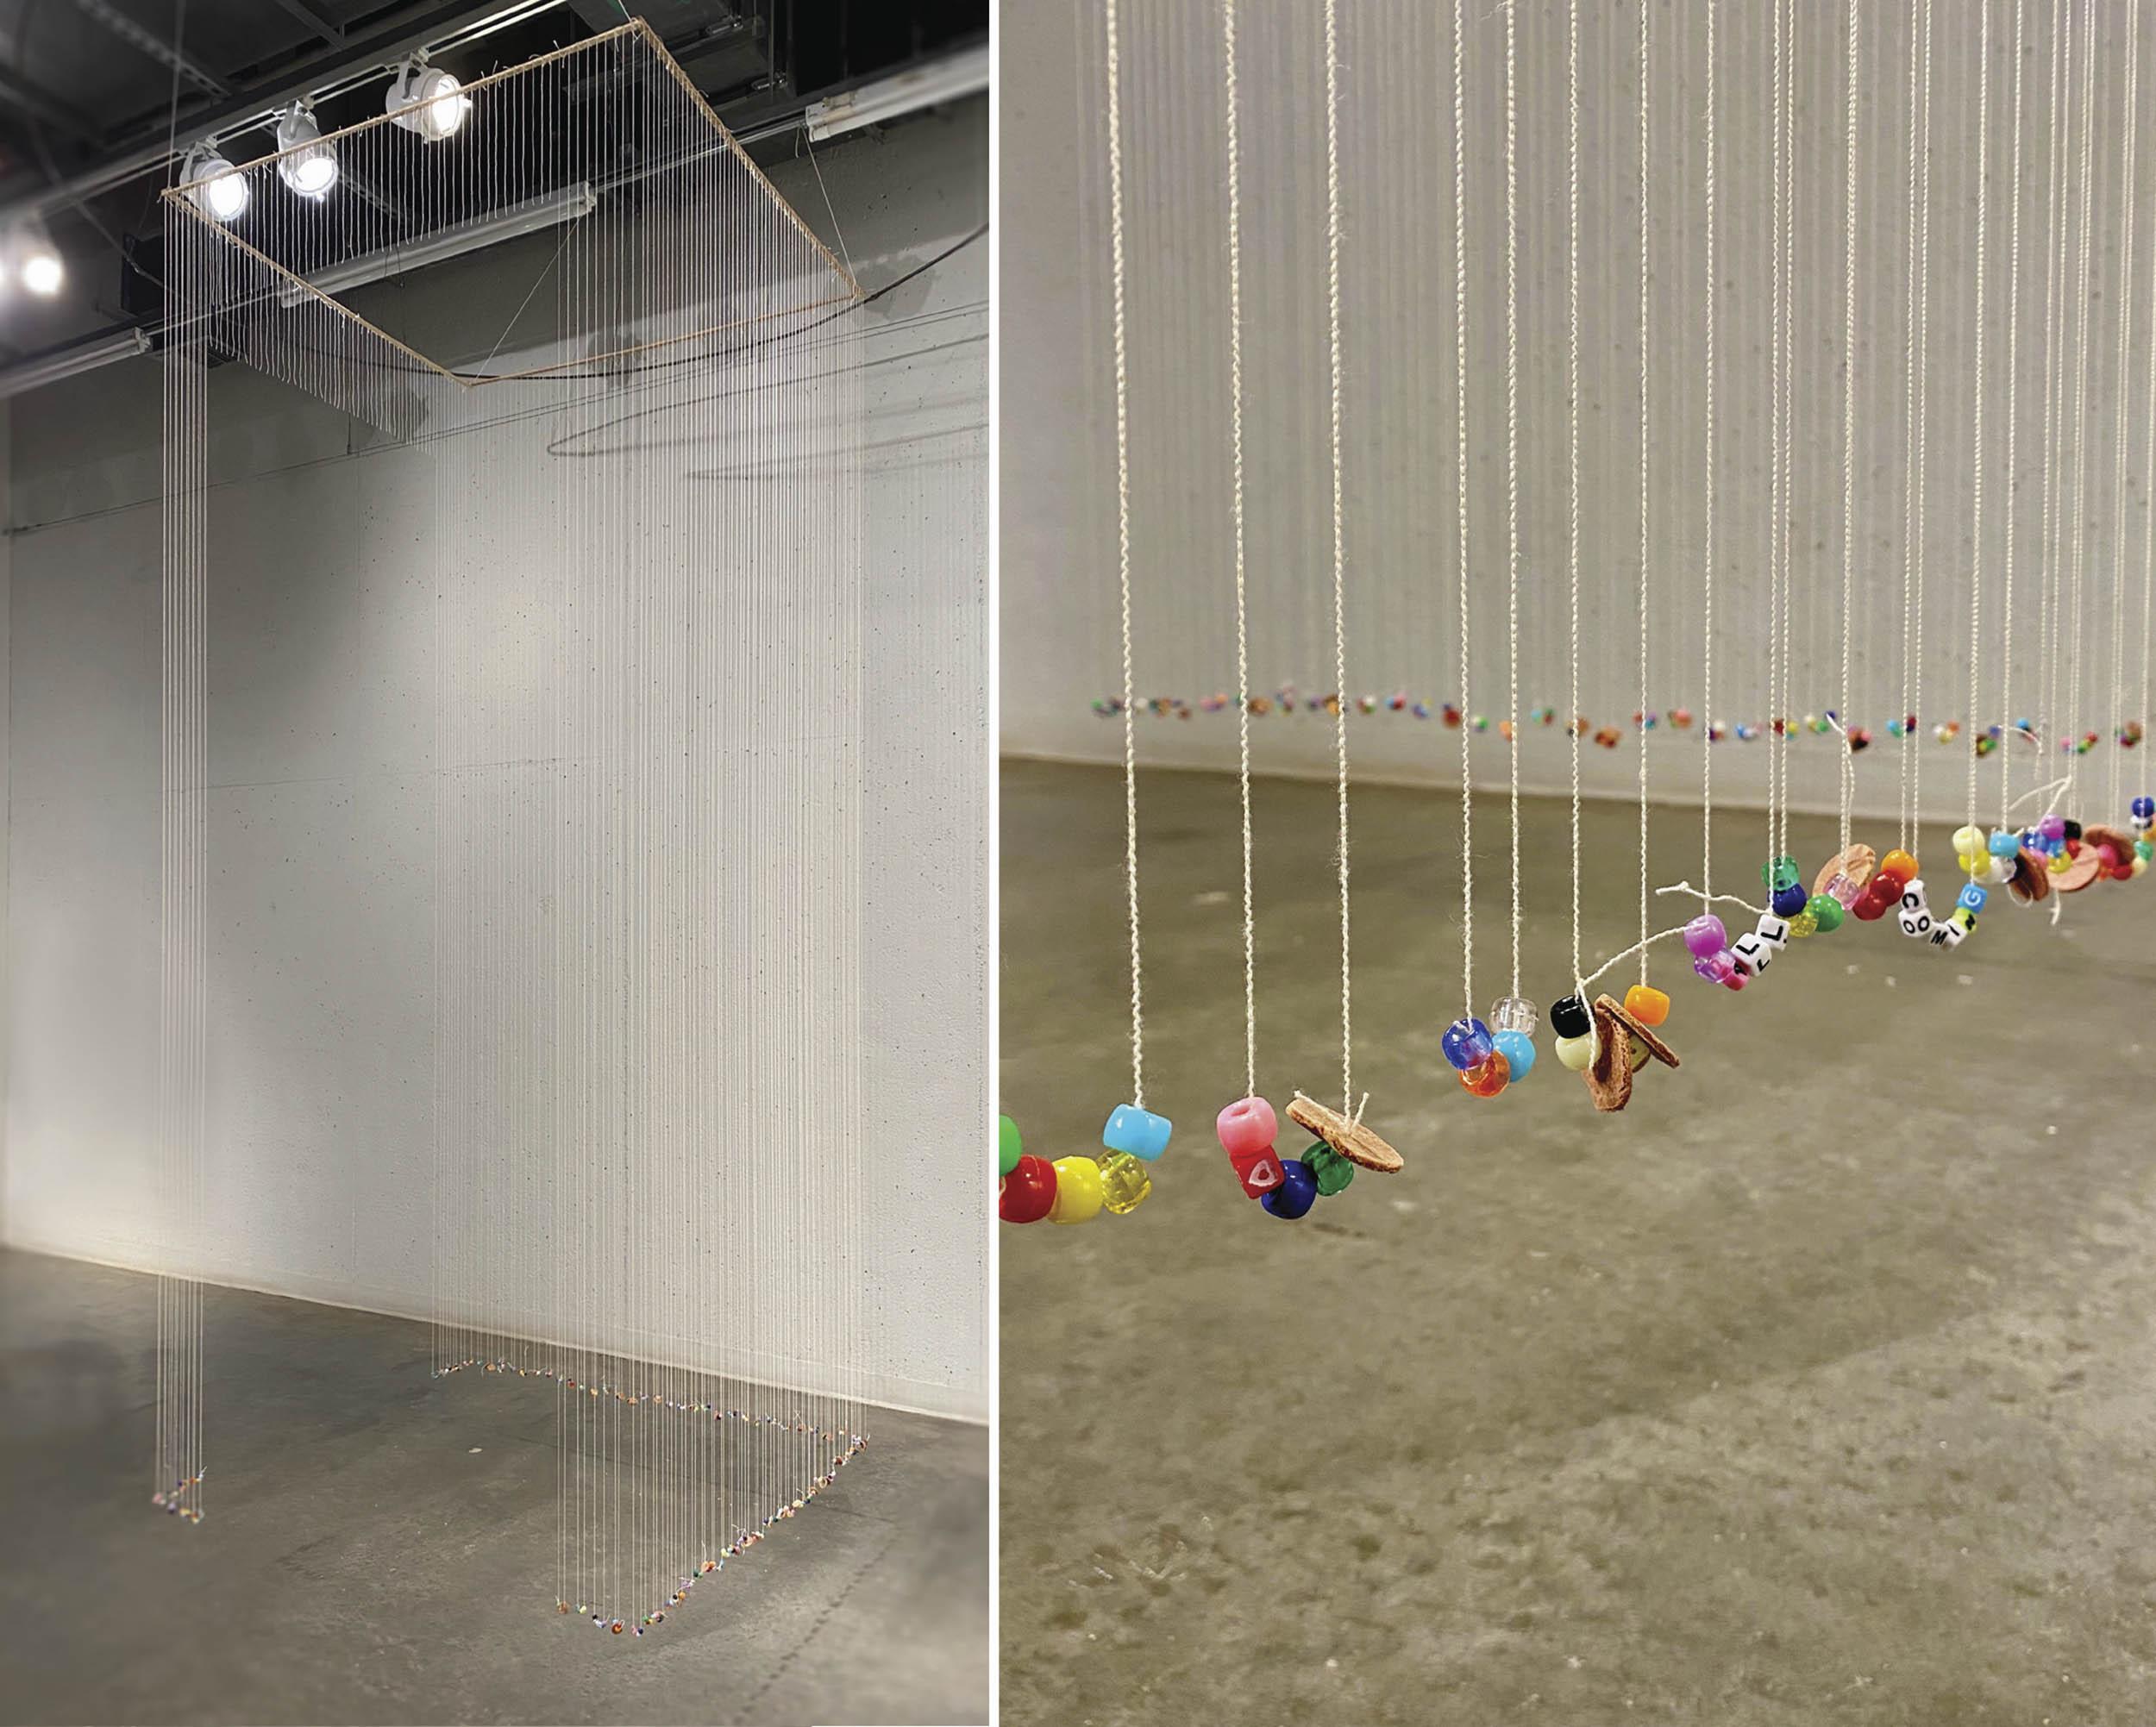 left: Long strings hanging from the ceiling with rocks on the bottom of the strings.  Right: up close picture of the multicolored rocks that are tied to the strings